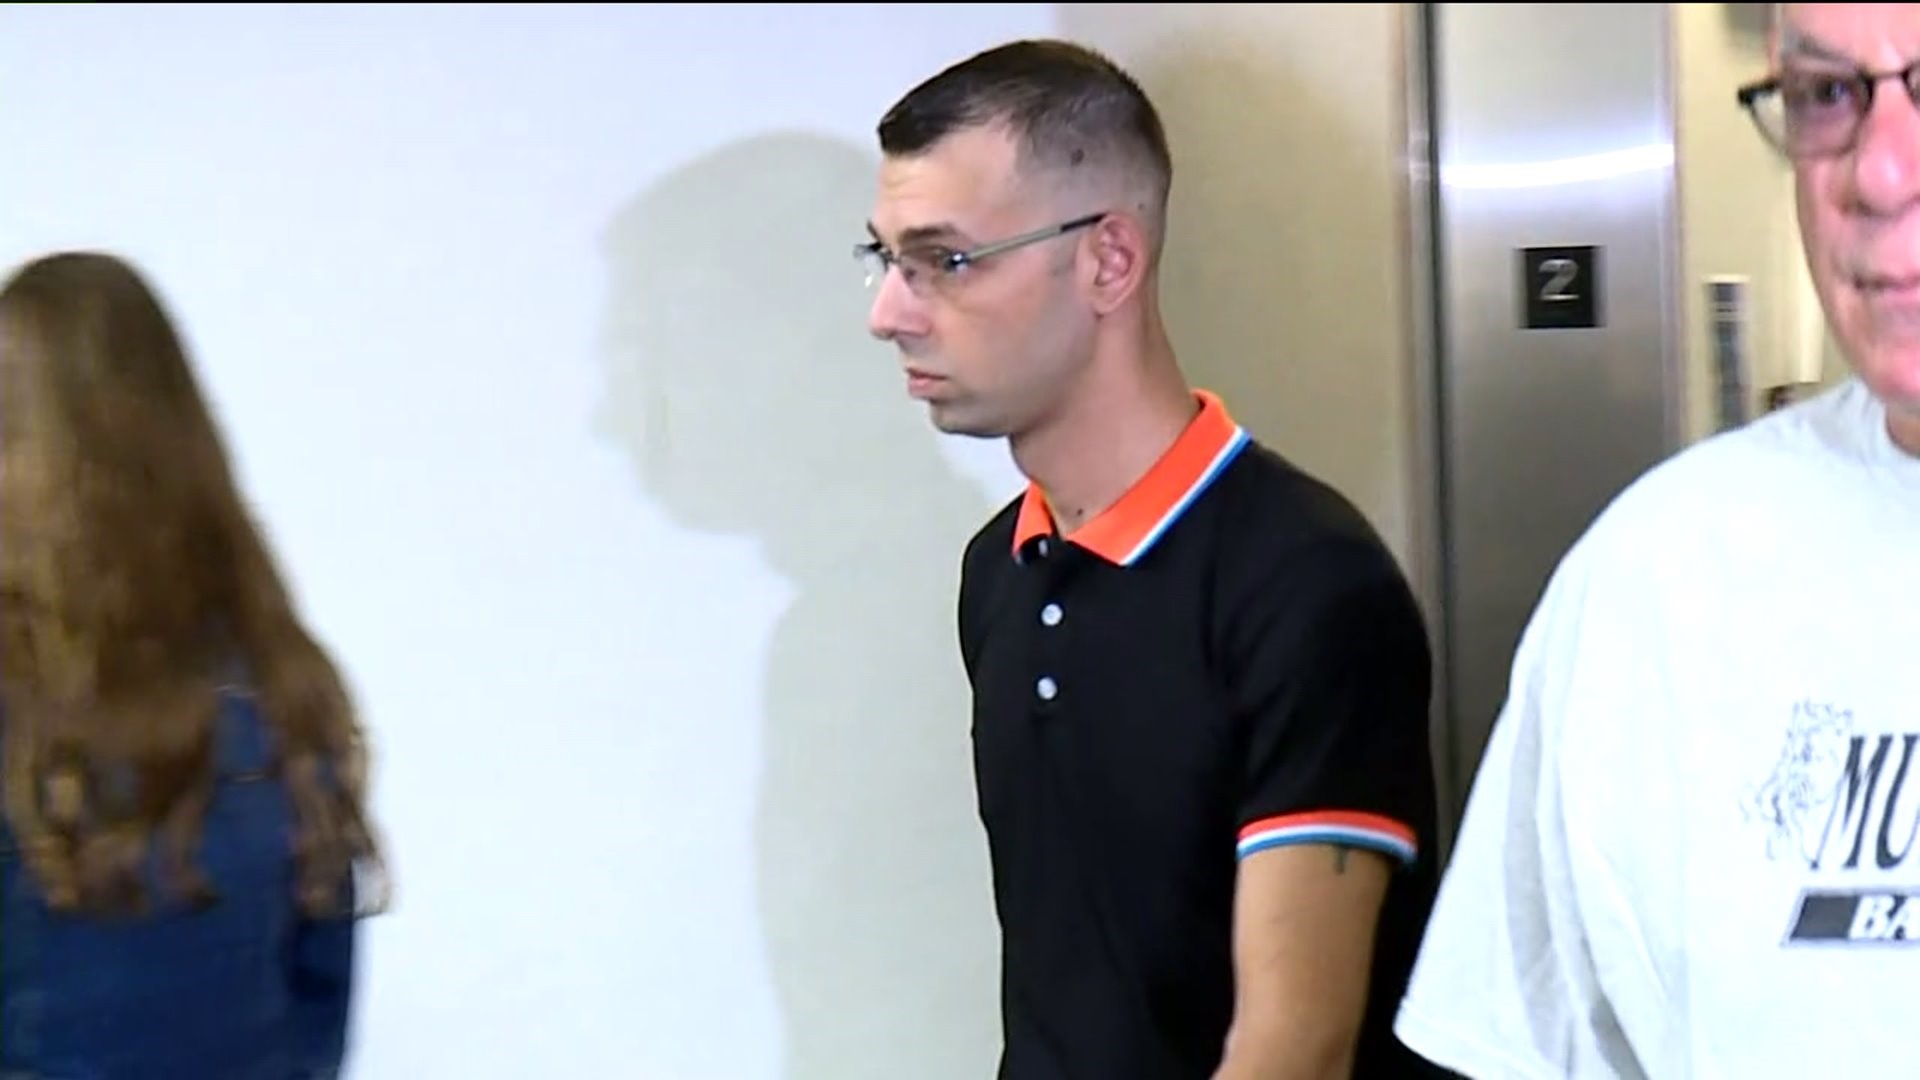 Judge Rejects Guilty Plea of EMT Accused of Molesting Patients with Special Needs